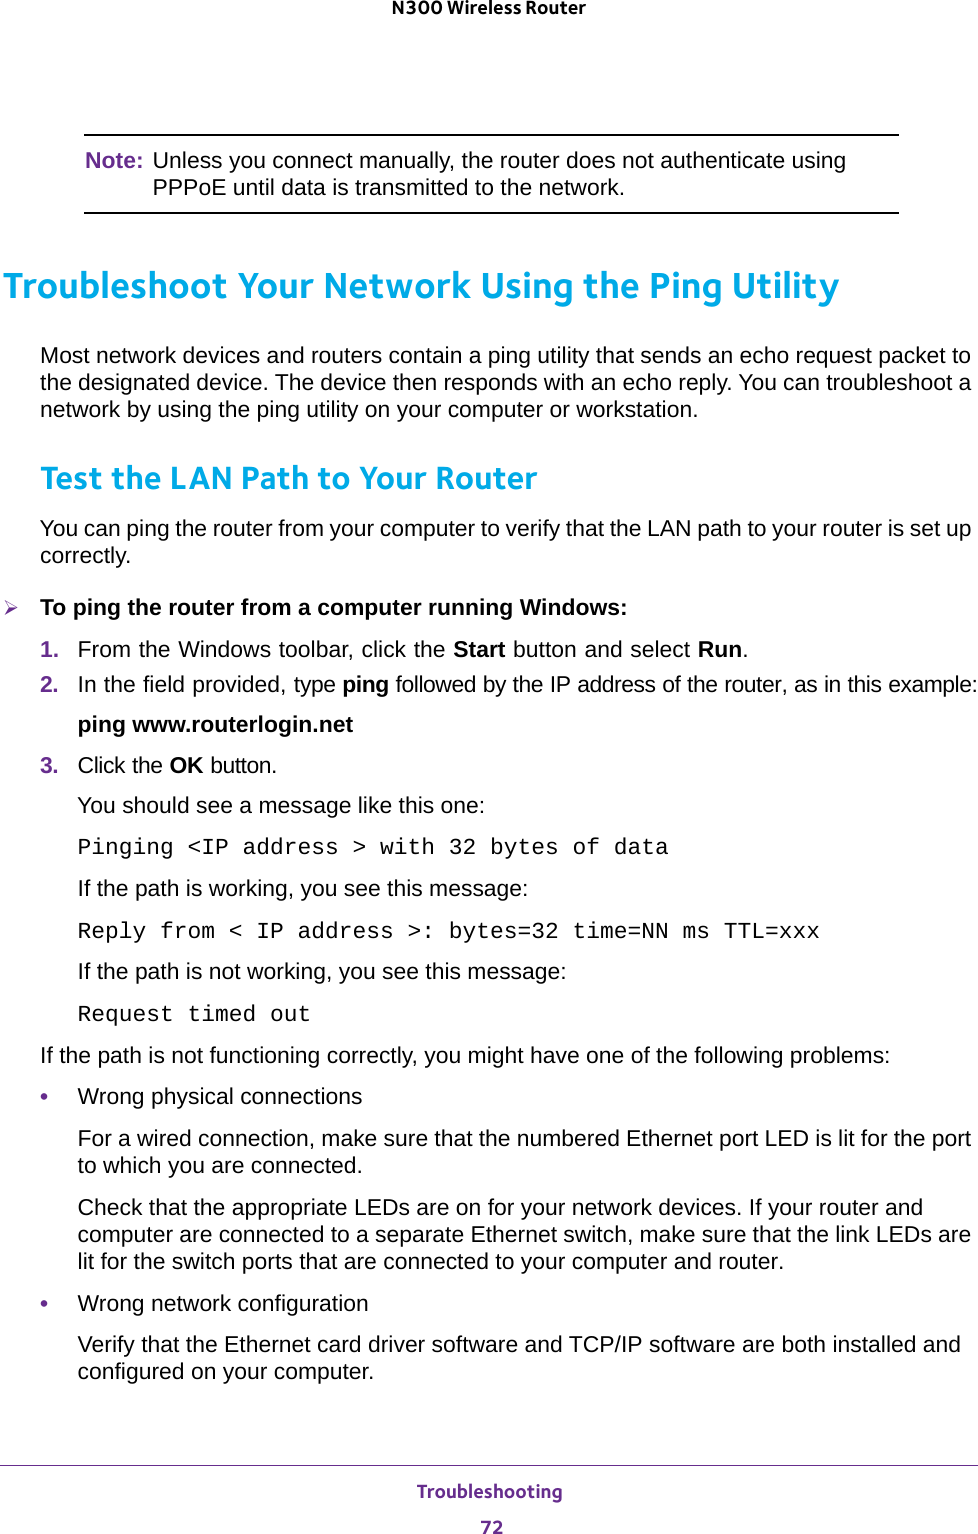 Troubleshooting 72N300 Wireless Router Note: Unless you connect manually, the router does not authenticate using PPPoE until data is transmitted to the network.Troubleshoot Your Network Using the Ping UtilityMost network devices and routers contain a ping utility that sends an echo request packet to the designated device. The device then responds with an echo reply. You can troubleshoot a network by using the ping utility on your computer or workstation. Test the LAN Path to Your RouterYou can ping the router from your computer to verify that the LAN path to your router is set up correctly.To ping the router from a computer running Windows:1.  From the Windows toolbar, click the Start button and select Run.2.  In the field provided, type ping followed by the IP address of the router, as in this example:ping www.routerlogin.net3.  Click the OK button.You should see a message like this one:Pinging &lt;IP address &gt; with 32 bytes of dataIf the path is working, you see this message:Reply from &lt; IP address &gt;: bytes=32 time=NN ms TTL=xxxIf the path is not working, you see this message:Request timed outIf the path is not functioning correctly, you might have one of the following problems:•Wrong physical connectionsFor a wired connection, make sure that the numbered Ethernet port LED is lit for the port to which you are connected.Check that the appropriate LEDs are on for your network devices. If your router and computer are connected to a separate Ethernet switch, make sure that the link LEDs are lit for the switch ports that are connected to your computer and router.•Wrong network configurationVerify that the Ethernet card driver software and TCP/IP software are both installed and configured on your computer. 